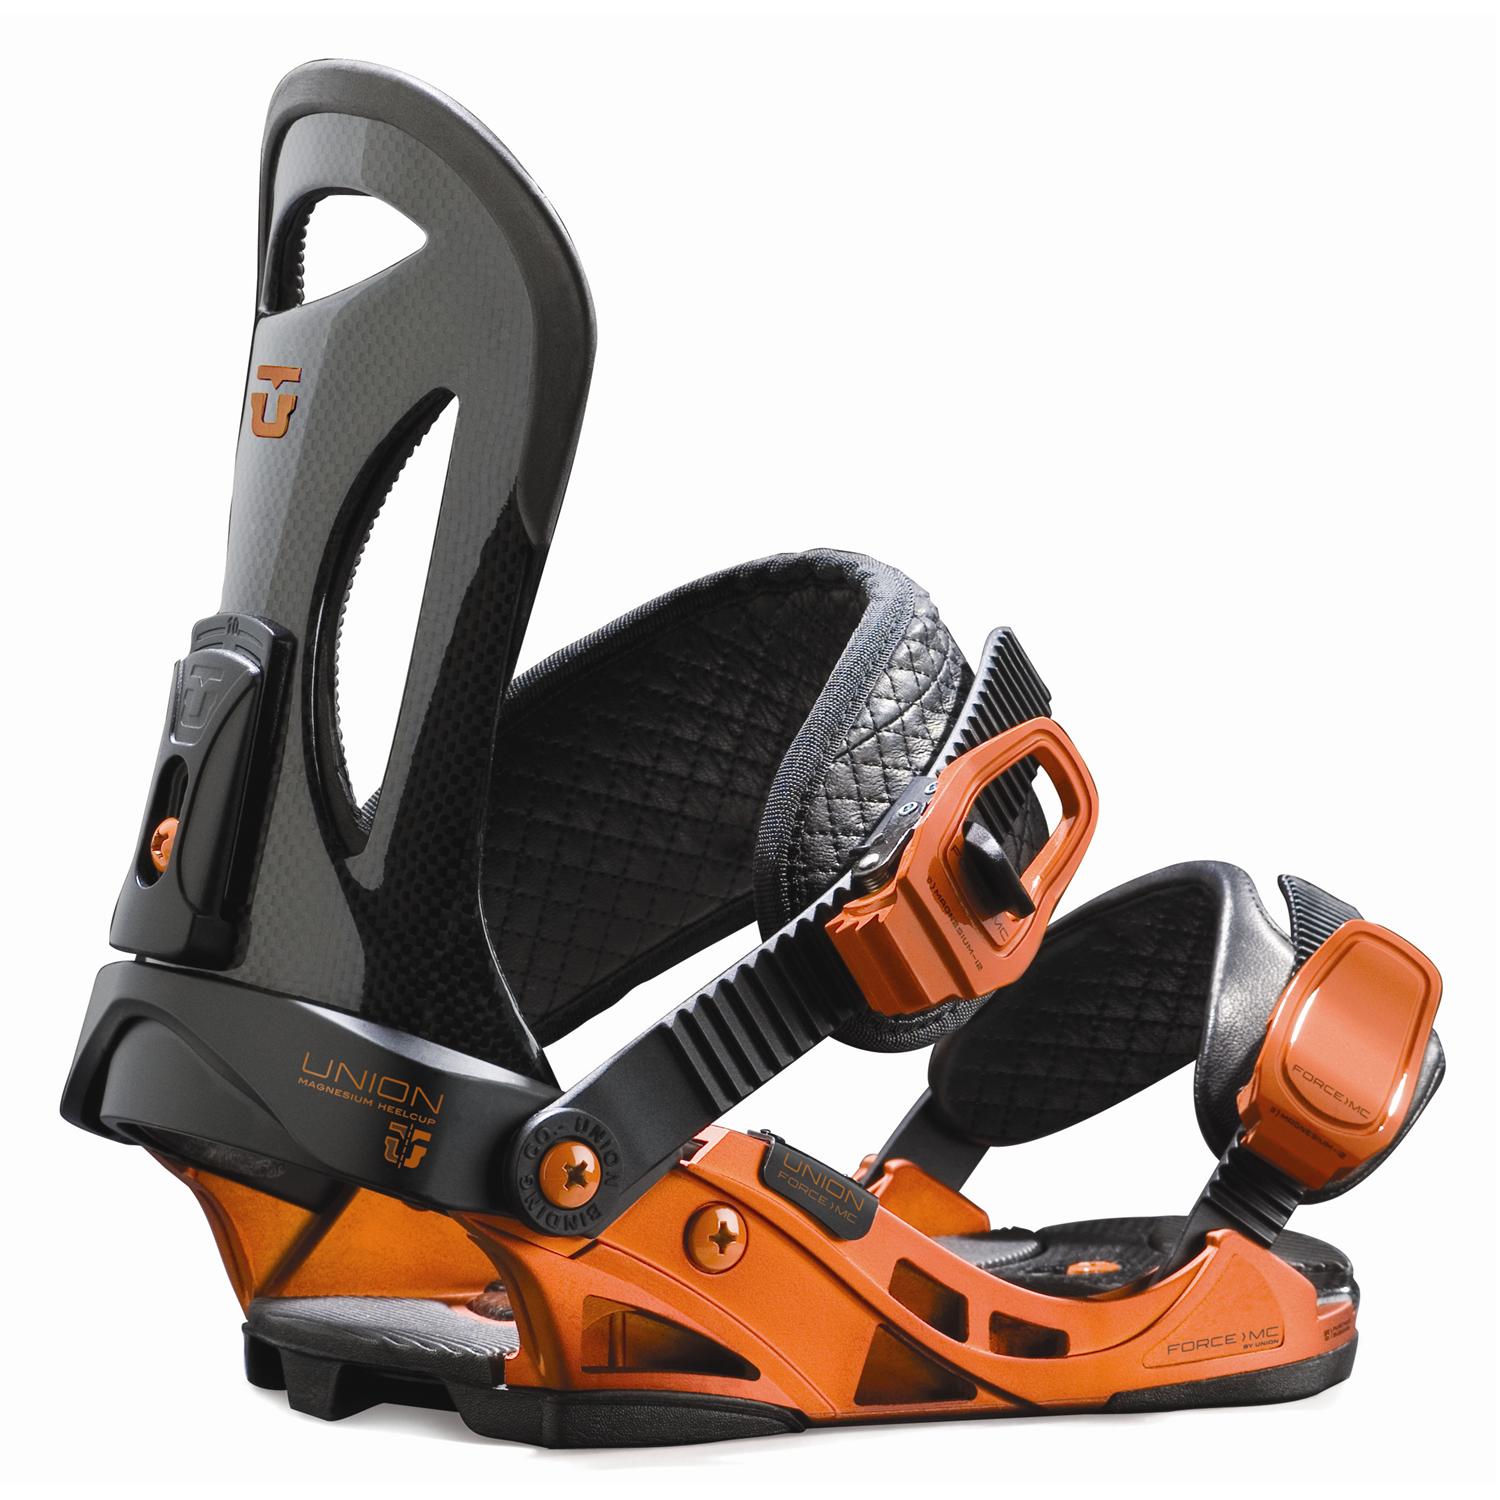 Union Force - MC Snowboard Bindings 2009 | evo outlet